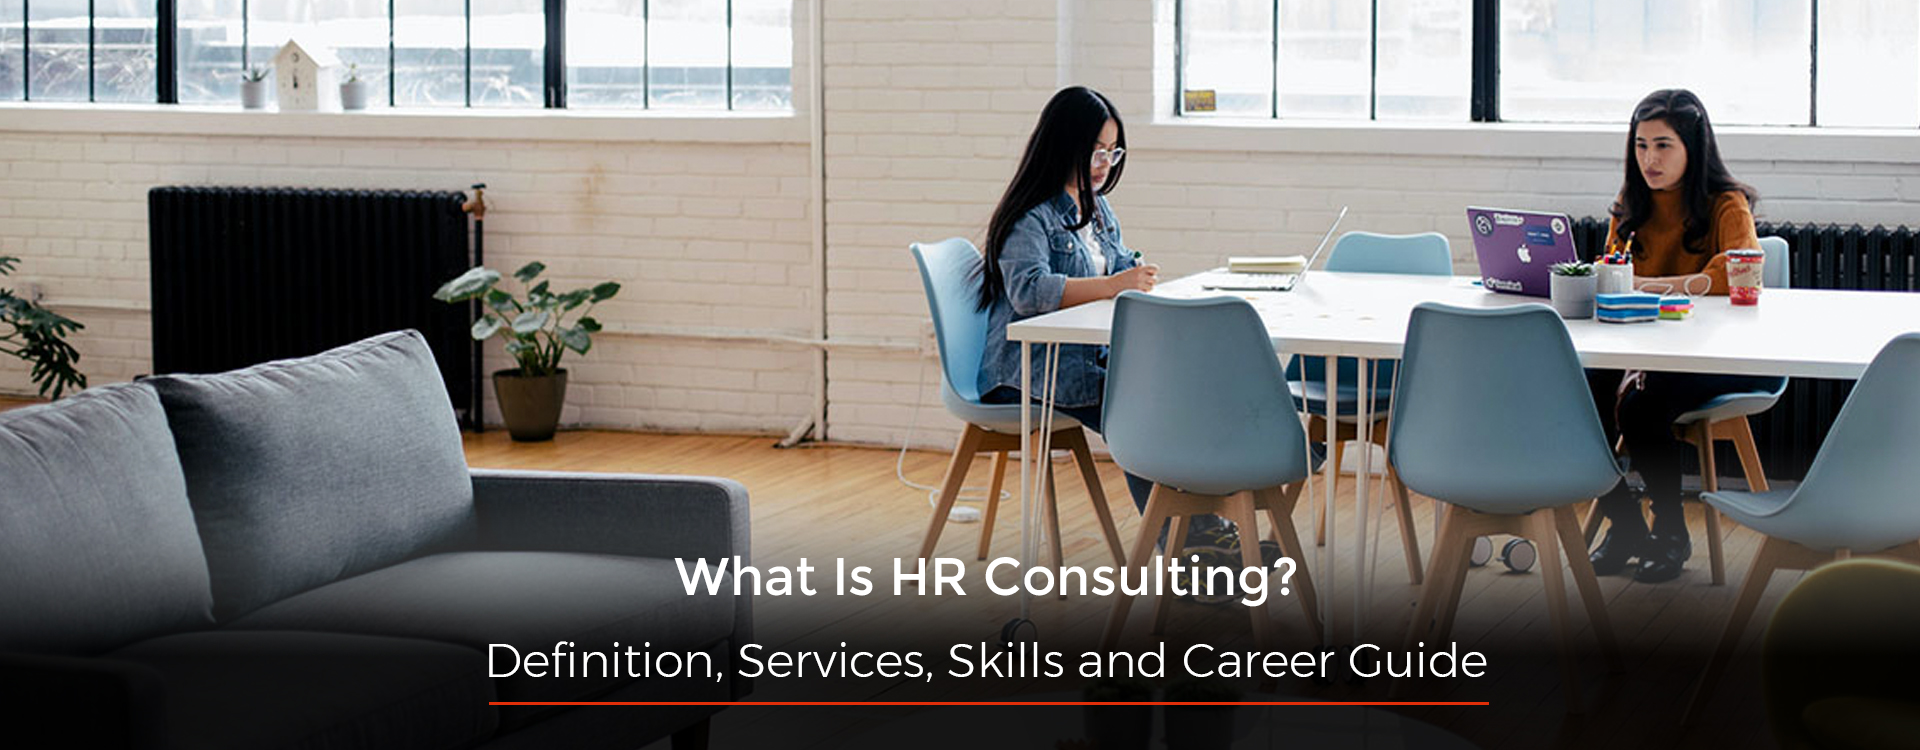 What Is HR Consulting? Definition, Services, Skills and Career Guide